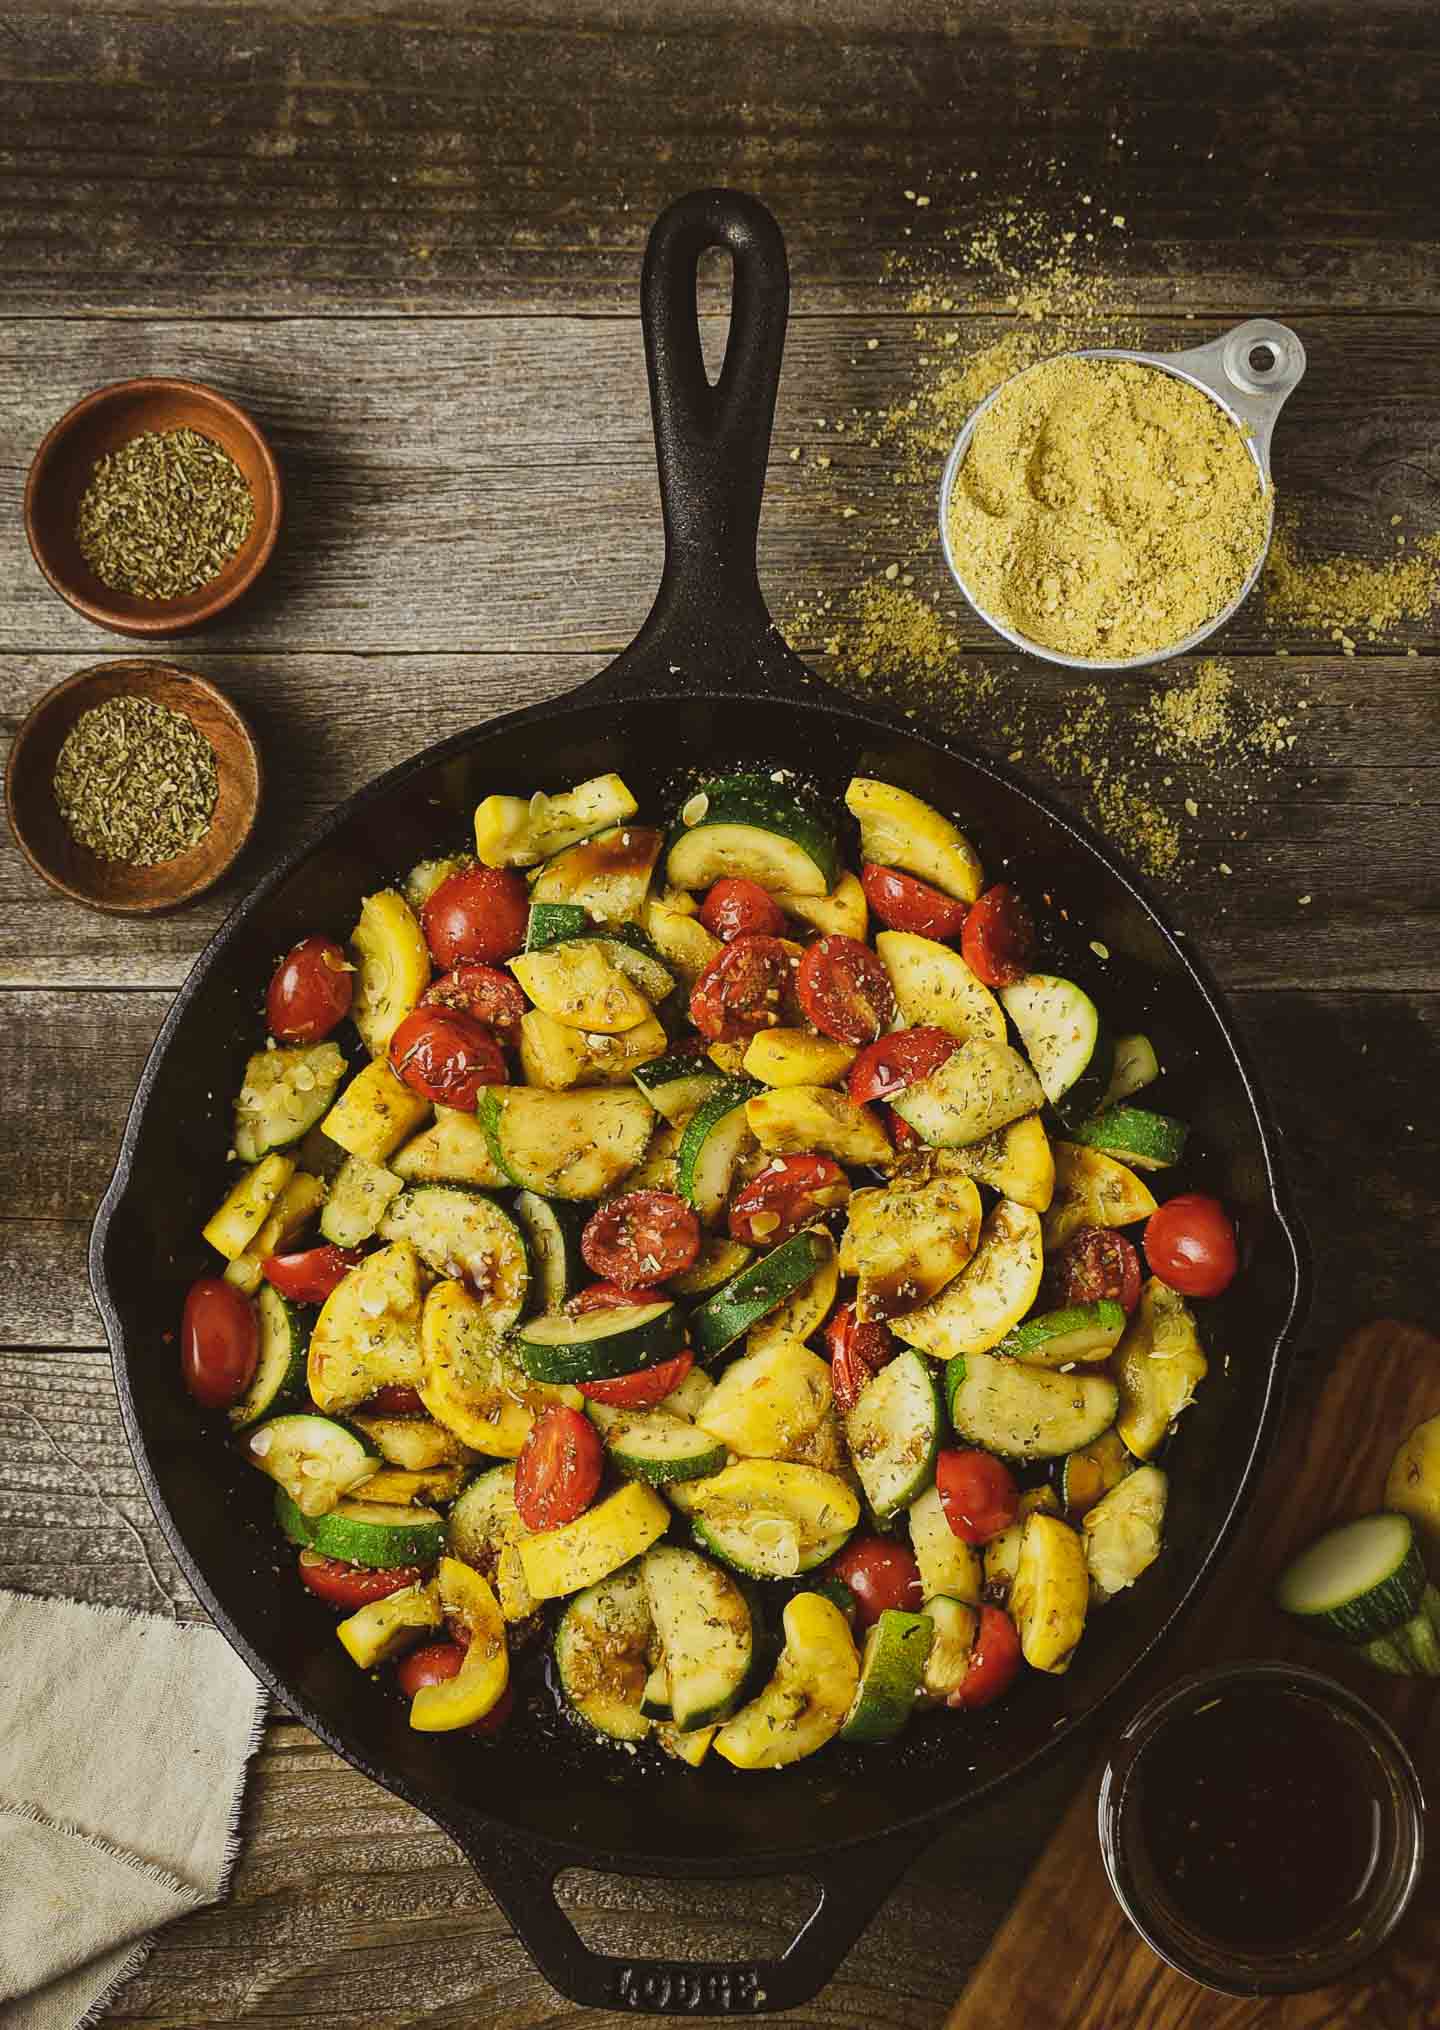 This Vegan Summer Squash Sauté is healthy, delicious, and so easy to make. It's made with yellow squash, zucchini, cherry Tomatoes, and vegan parmesan in one skillet. And, it's completely oil-free. 